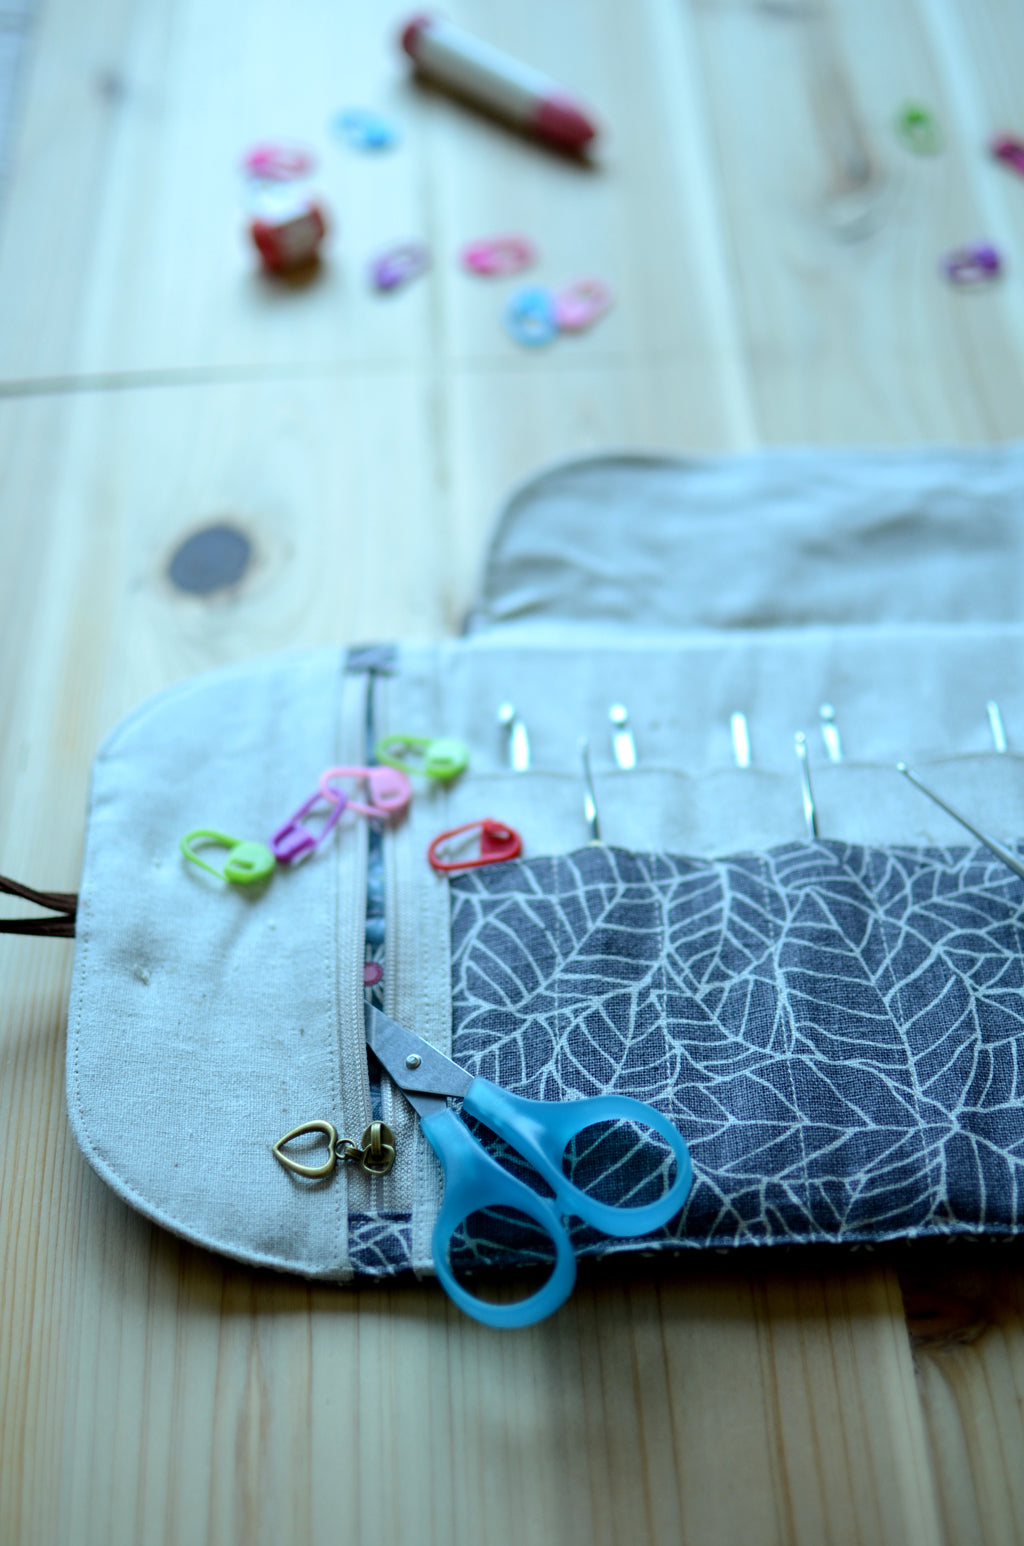 Crochet hook storage in natural linen with a built-in zipper pocket ...